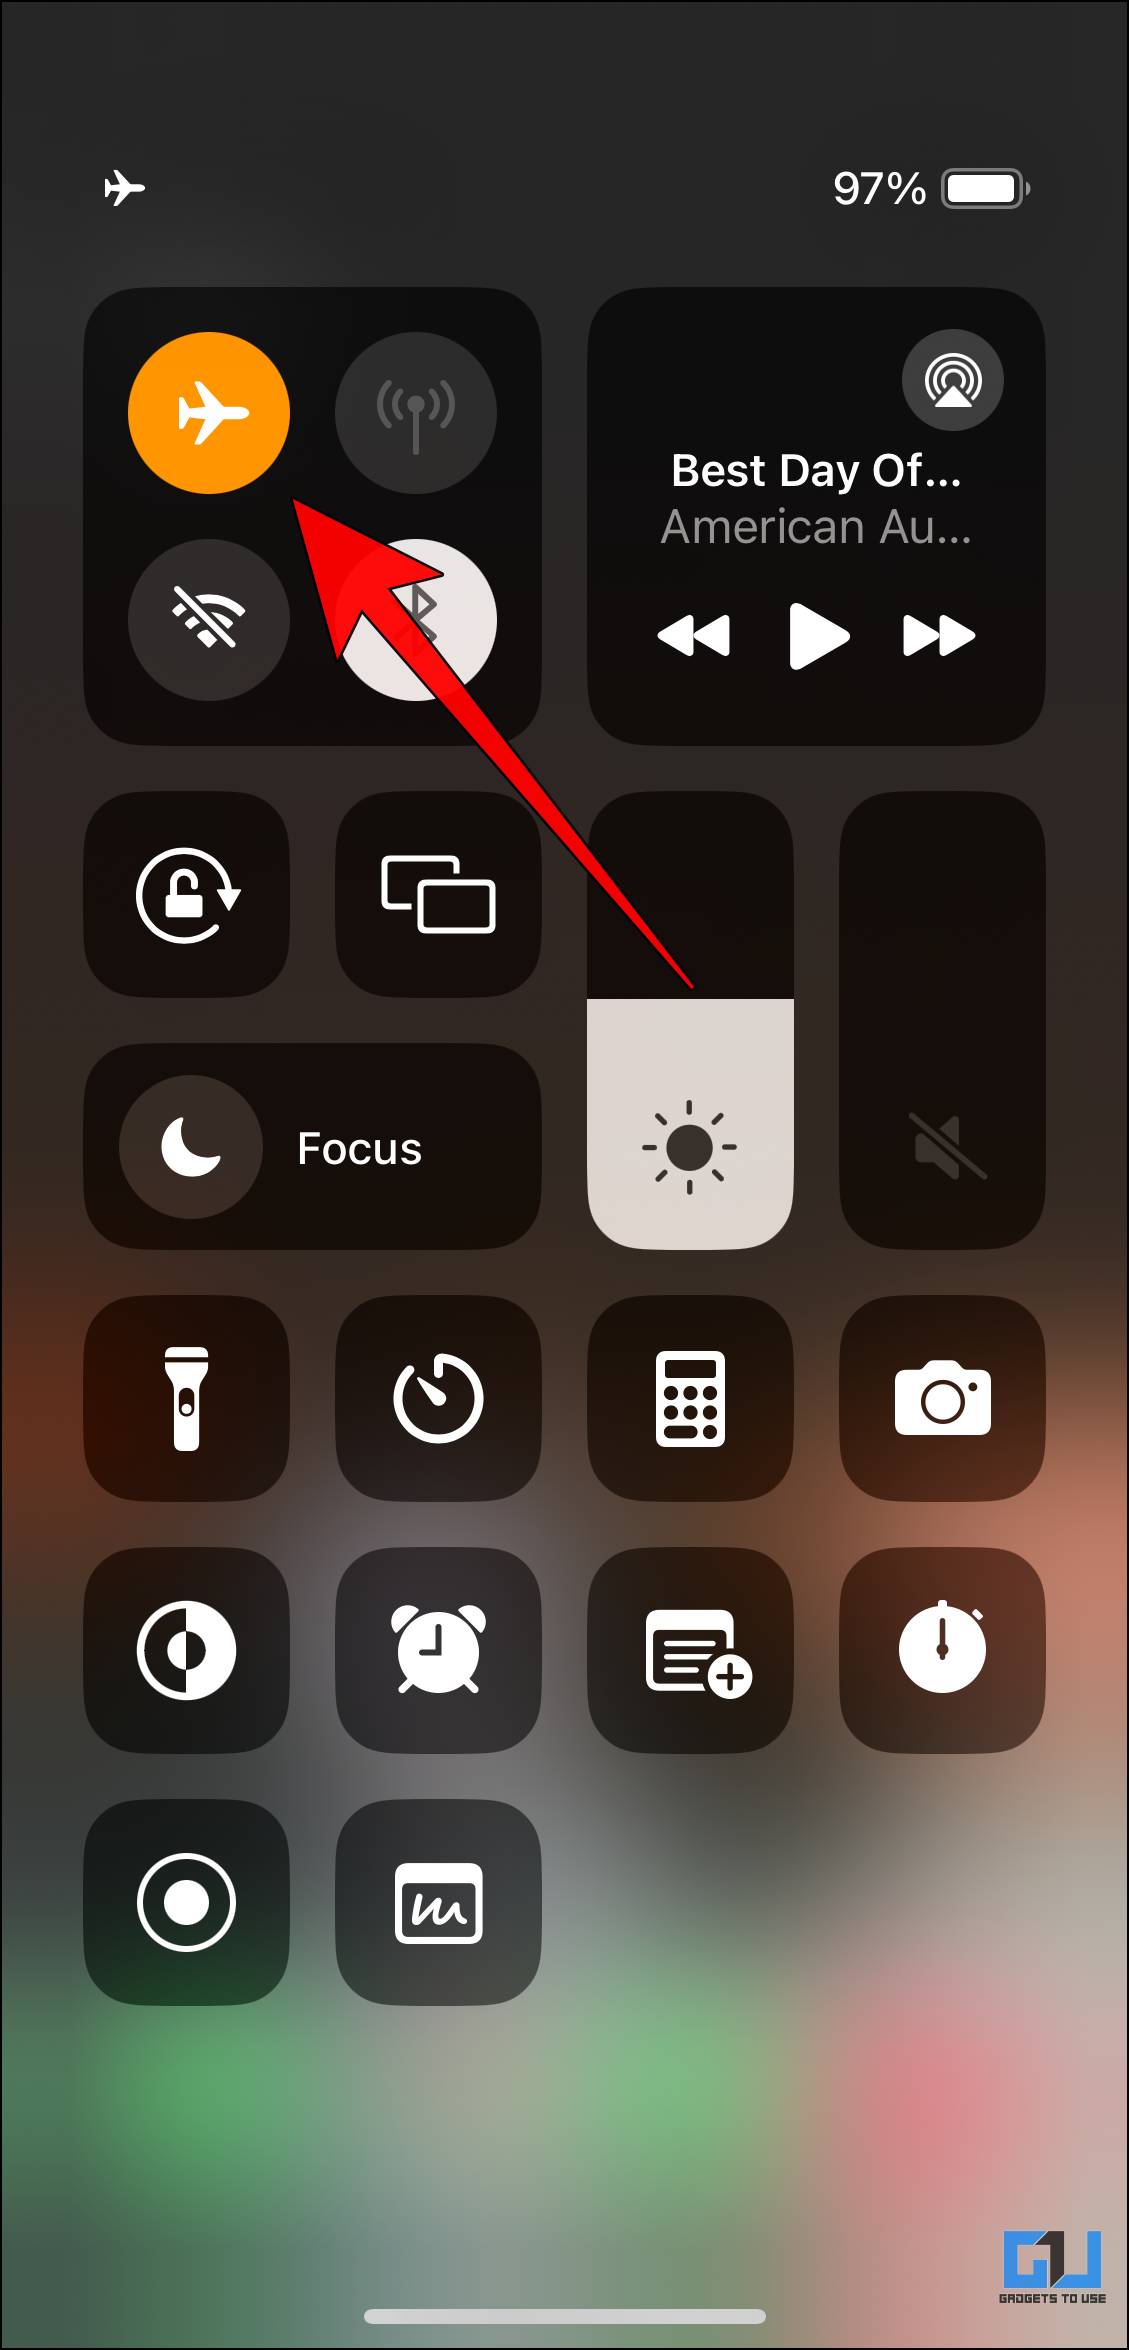 Tap Again on Airplane Toggle to Disable Airplane Mode